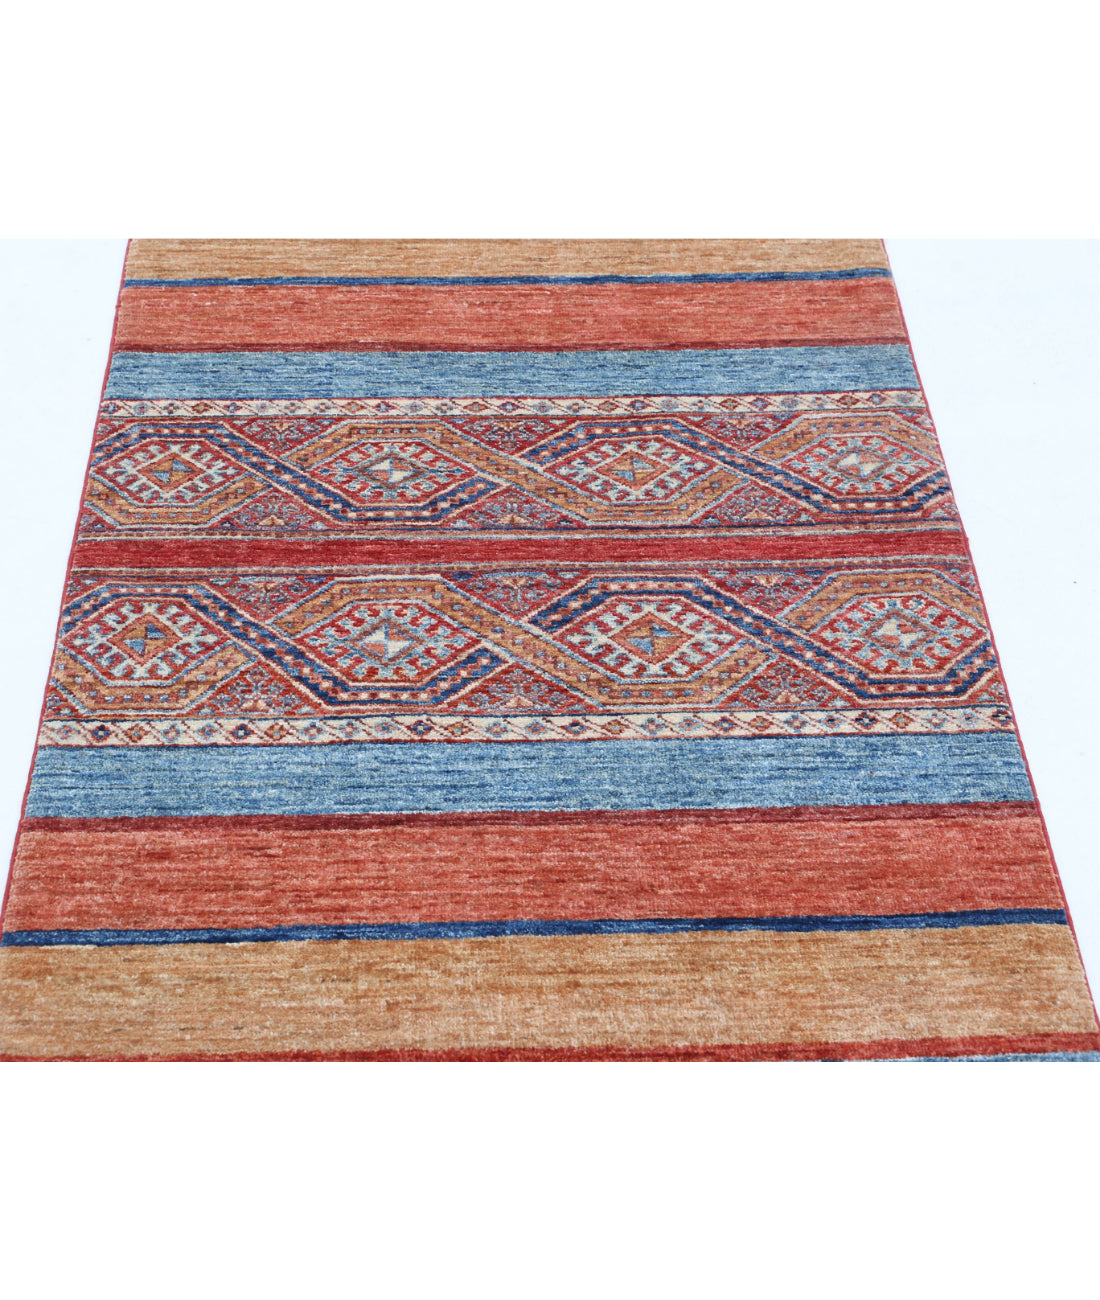 Hand Knotted Khurjeen Wool Rug - 2'11'' x 4'9'' 2'11'' x 4'9'' (88 X 143) / Multi / Multi